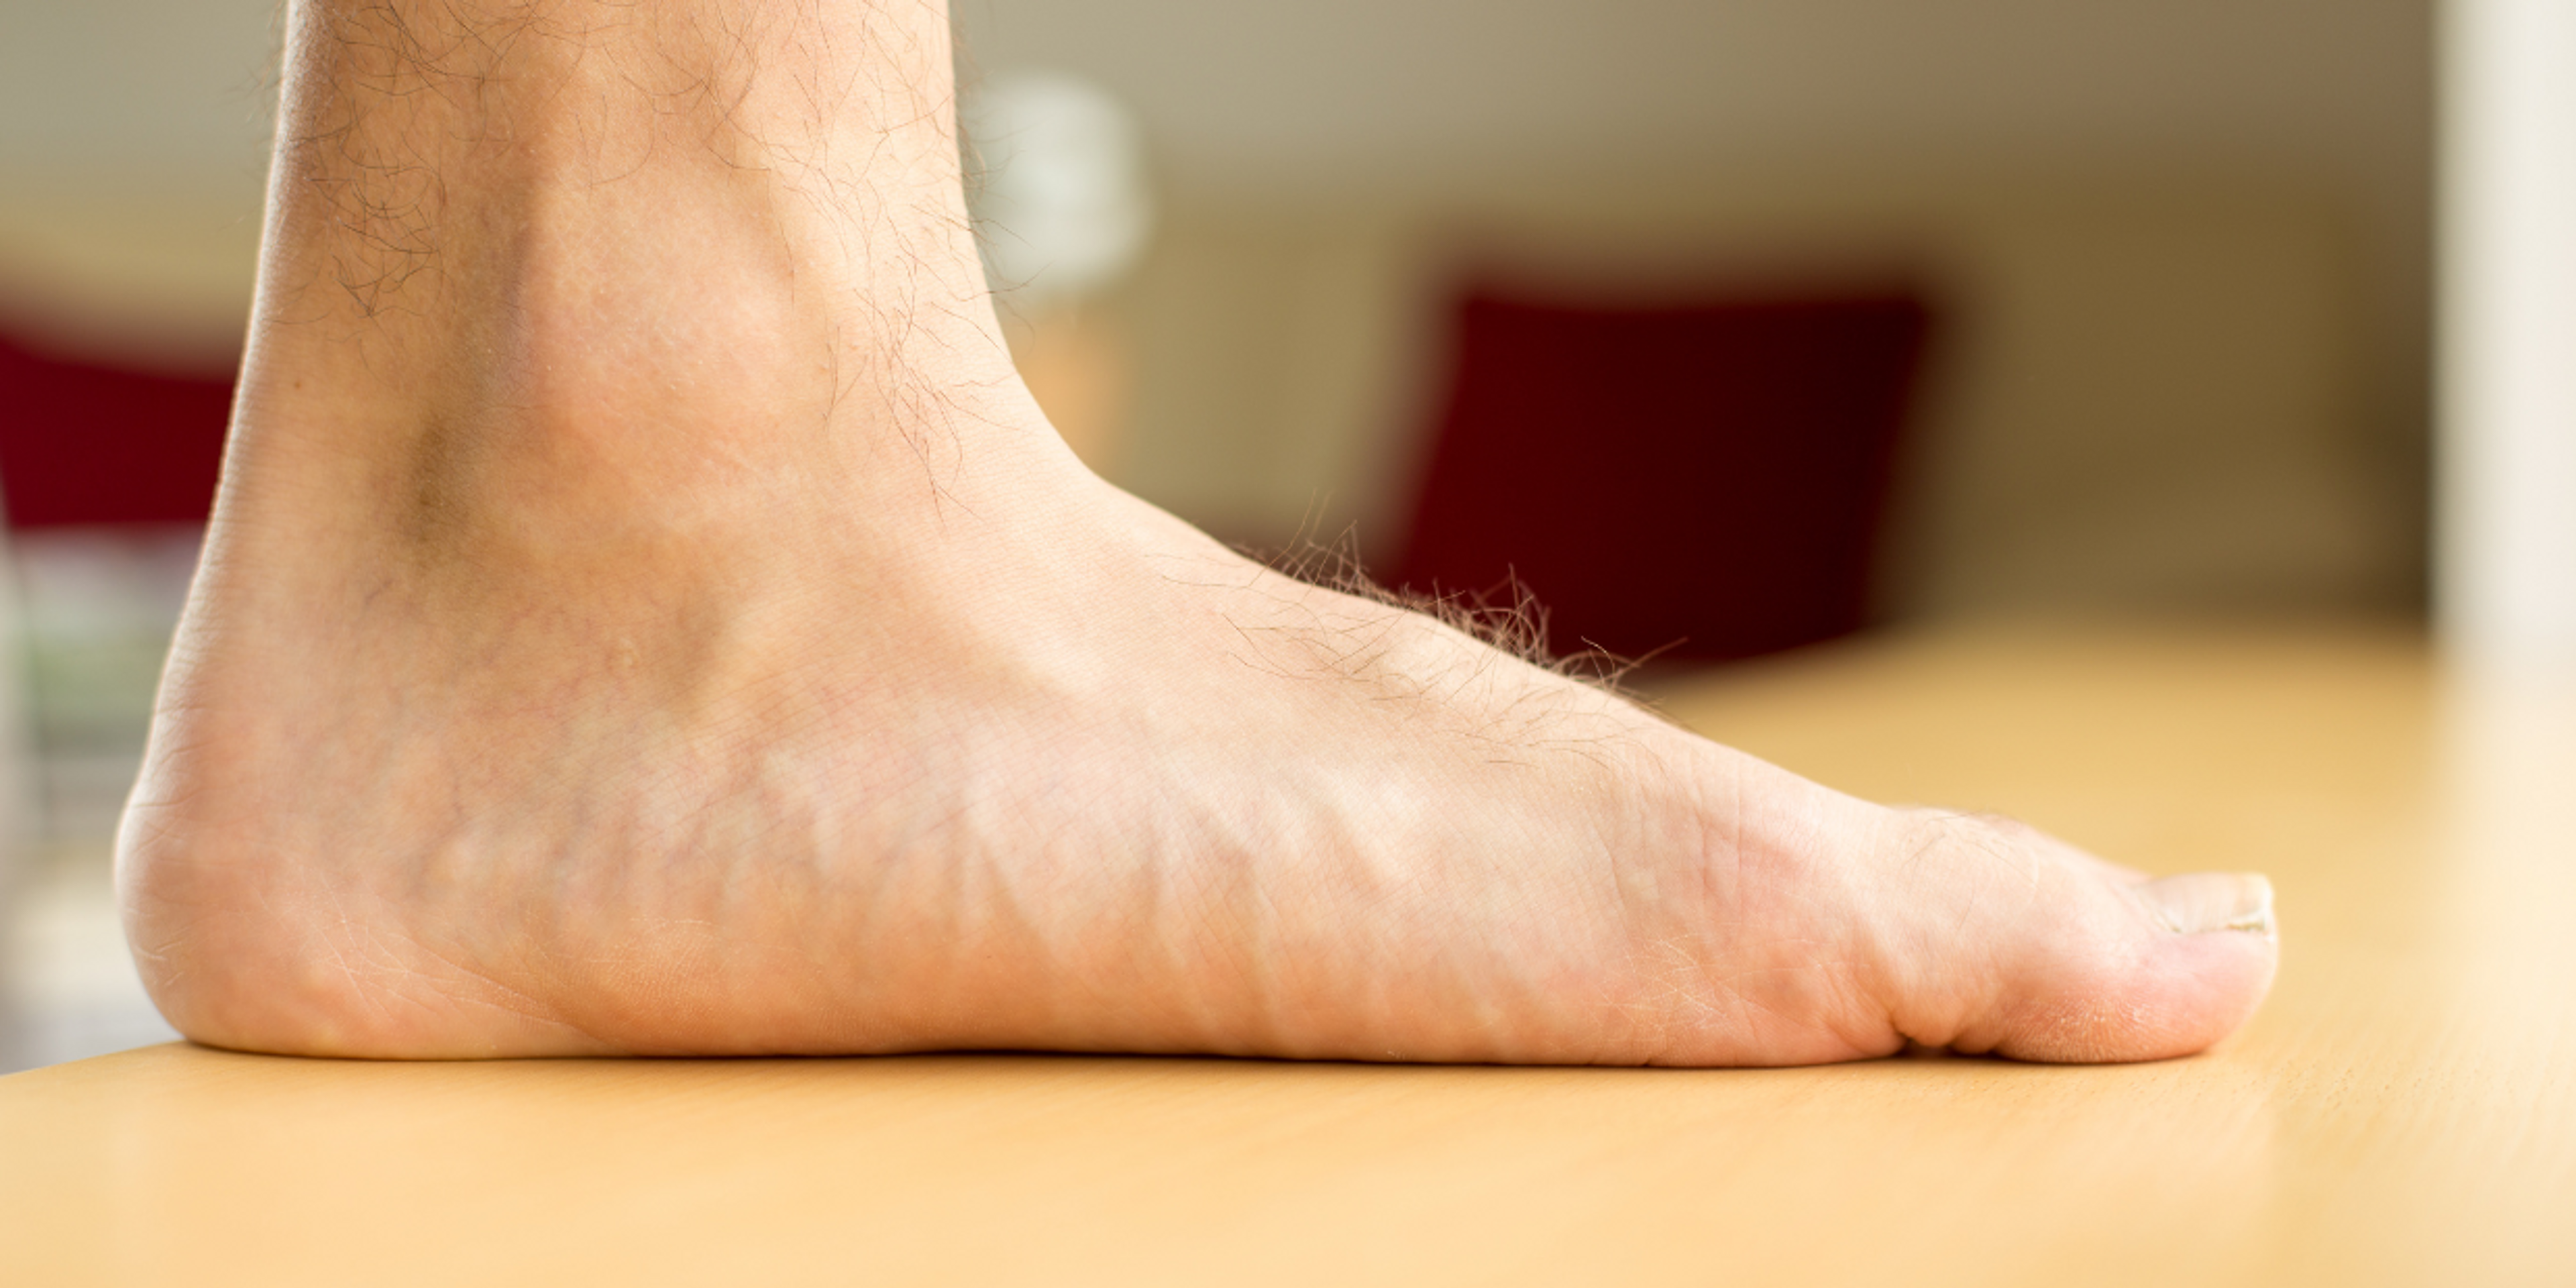 Flat feet can predispose you to developing plantar fasciitis and you may benefit from custom orthotics if you have this foot shape.